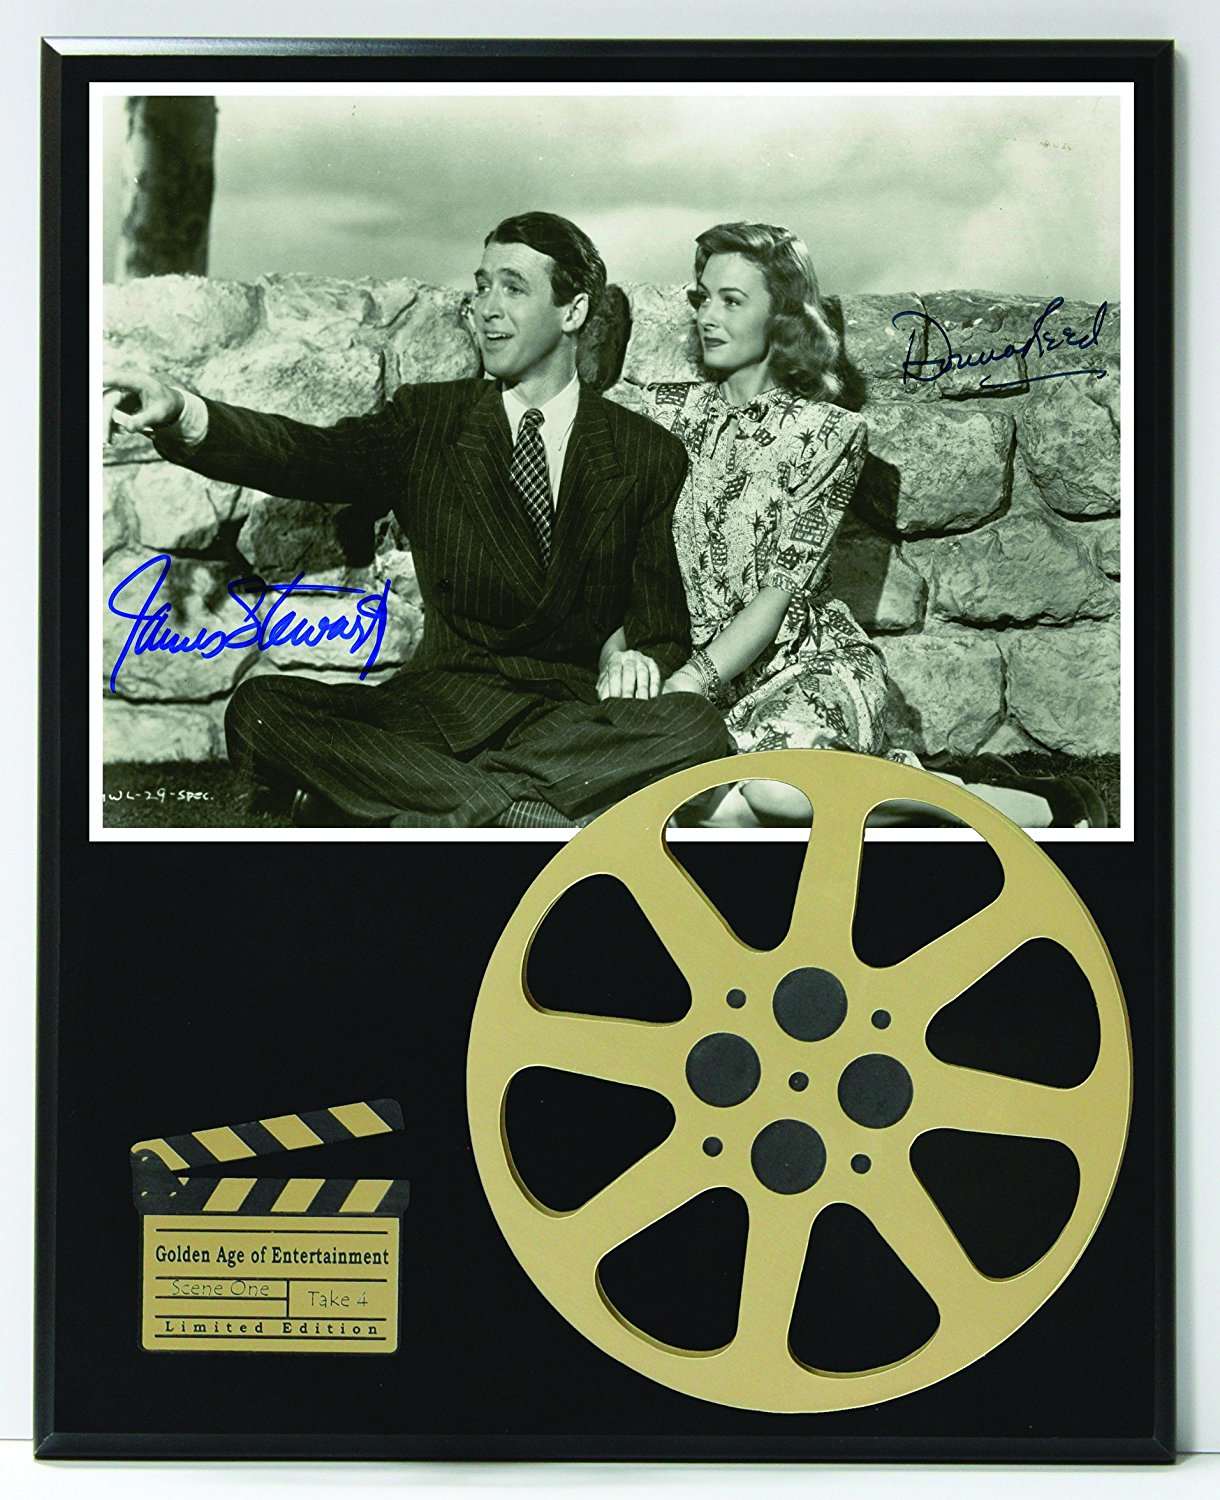 Jimmy Stewart and Donna Reed Limited Edition Reproduction Autographed Movie  Reel Display K1 - Gold Record Outlet Album and Disc Collectible Memorabilia